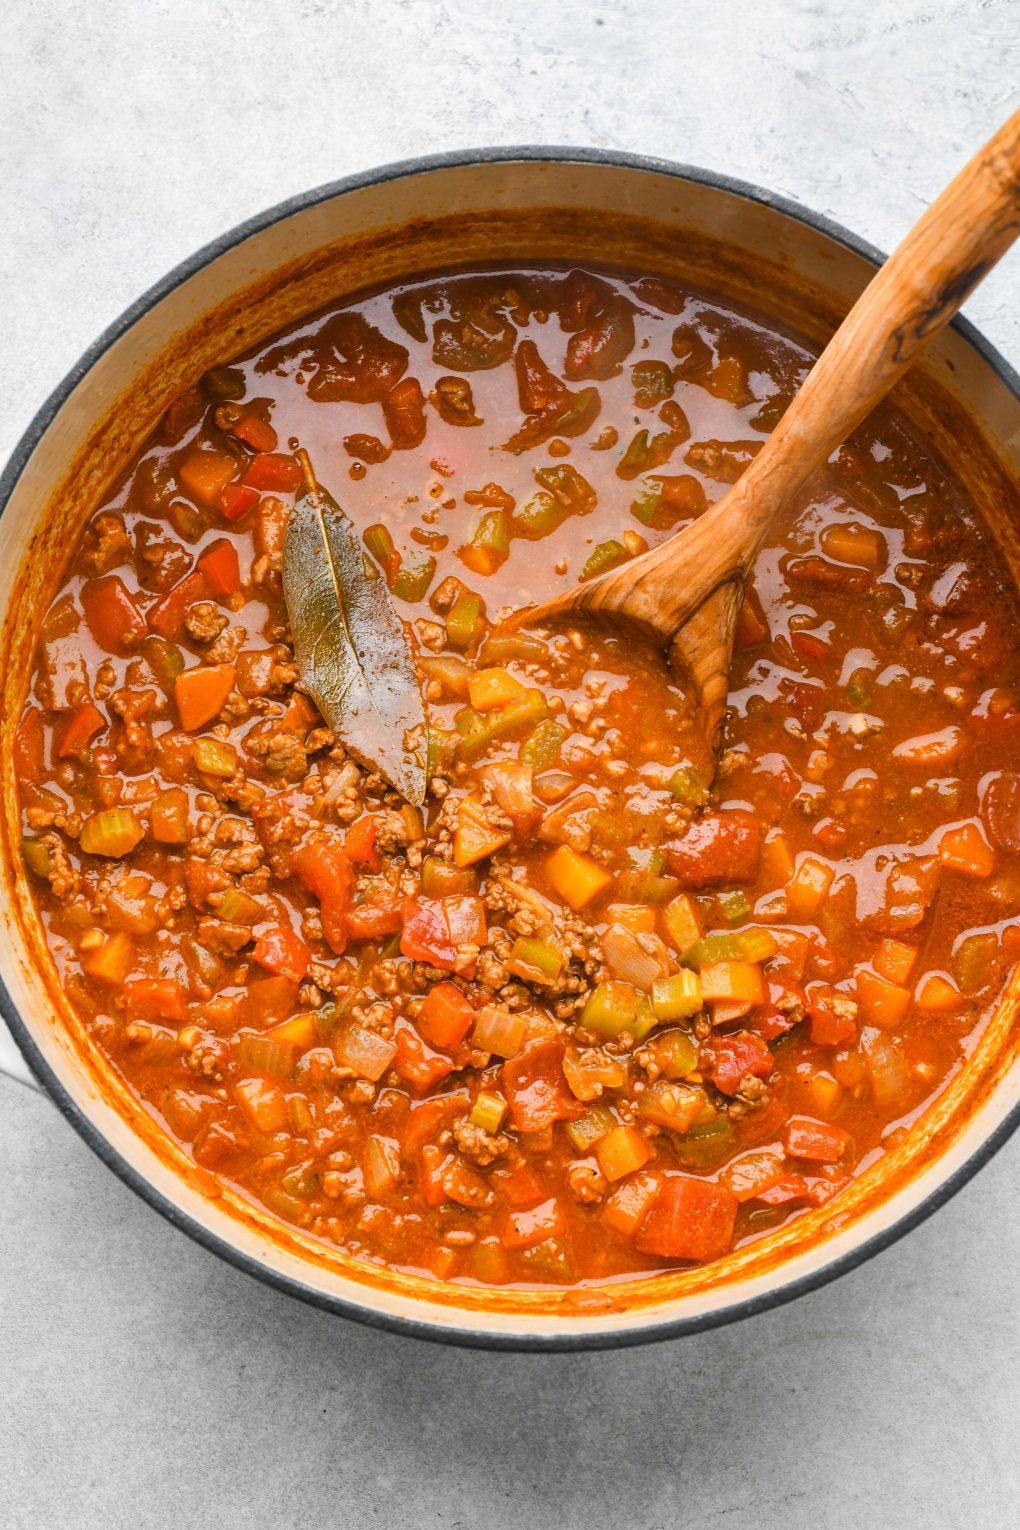 How to make beanless Whole30 chili: Finished chili.